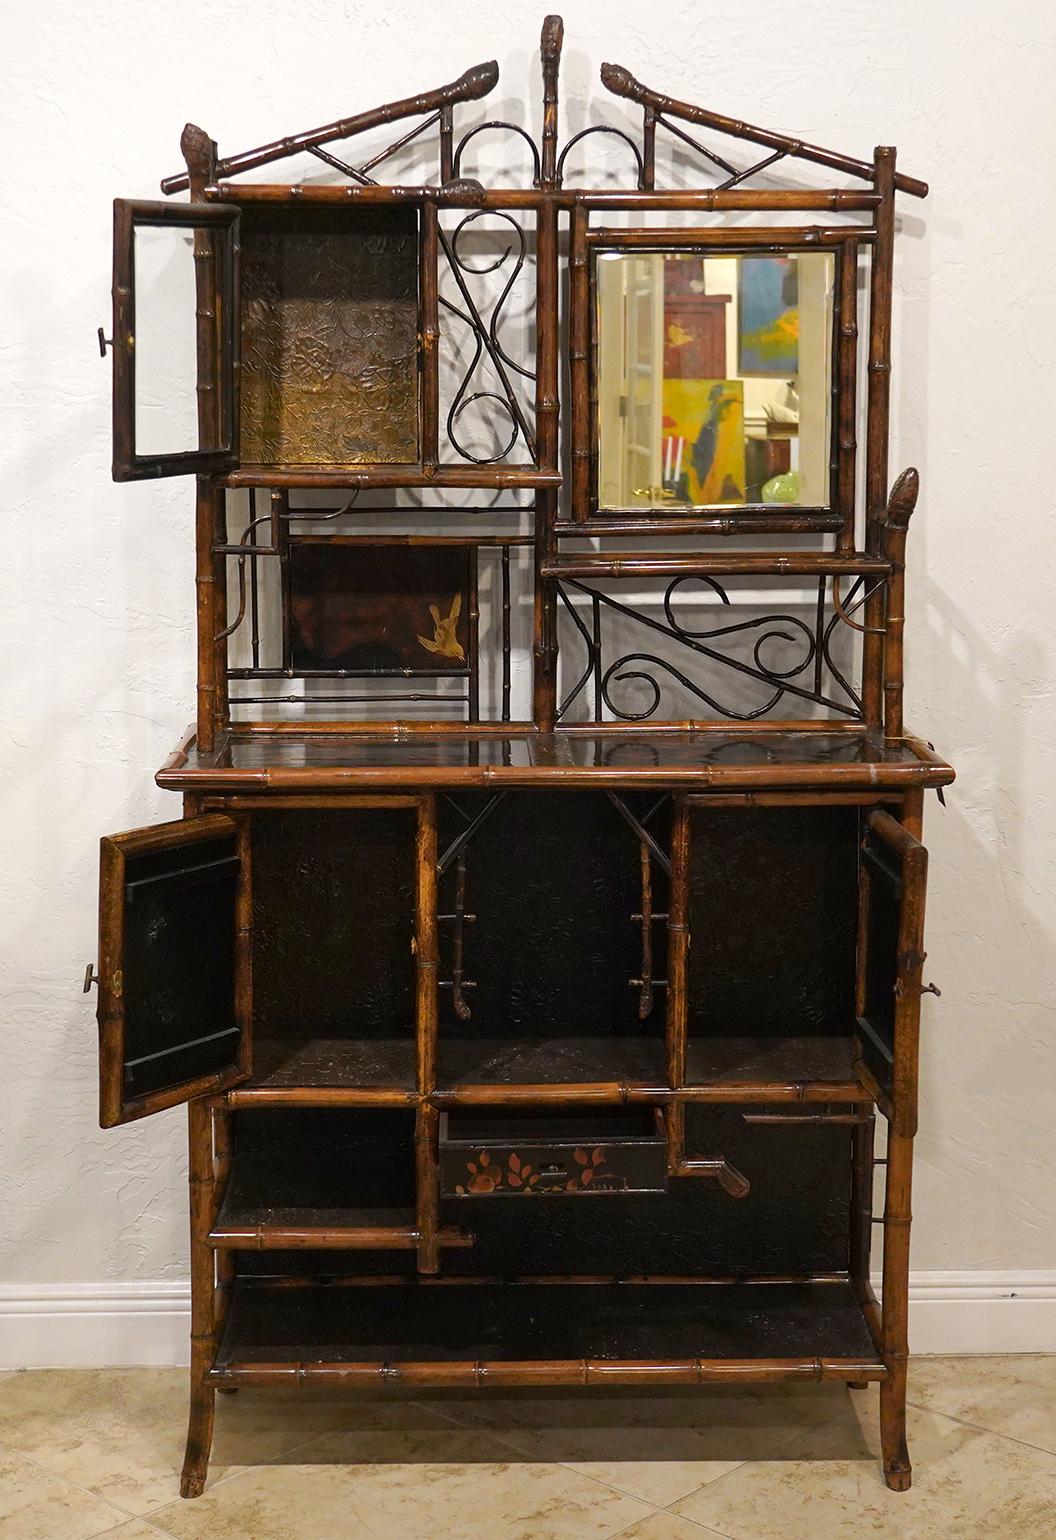 Bone English Aesthetic Movement Bamboo and Lacquer Inlaid Cabinet Etagere, circa 1890